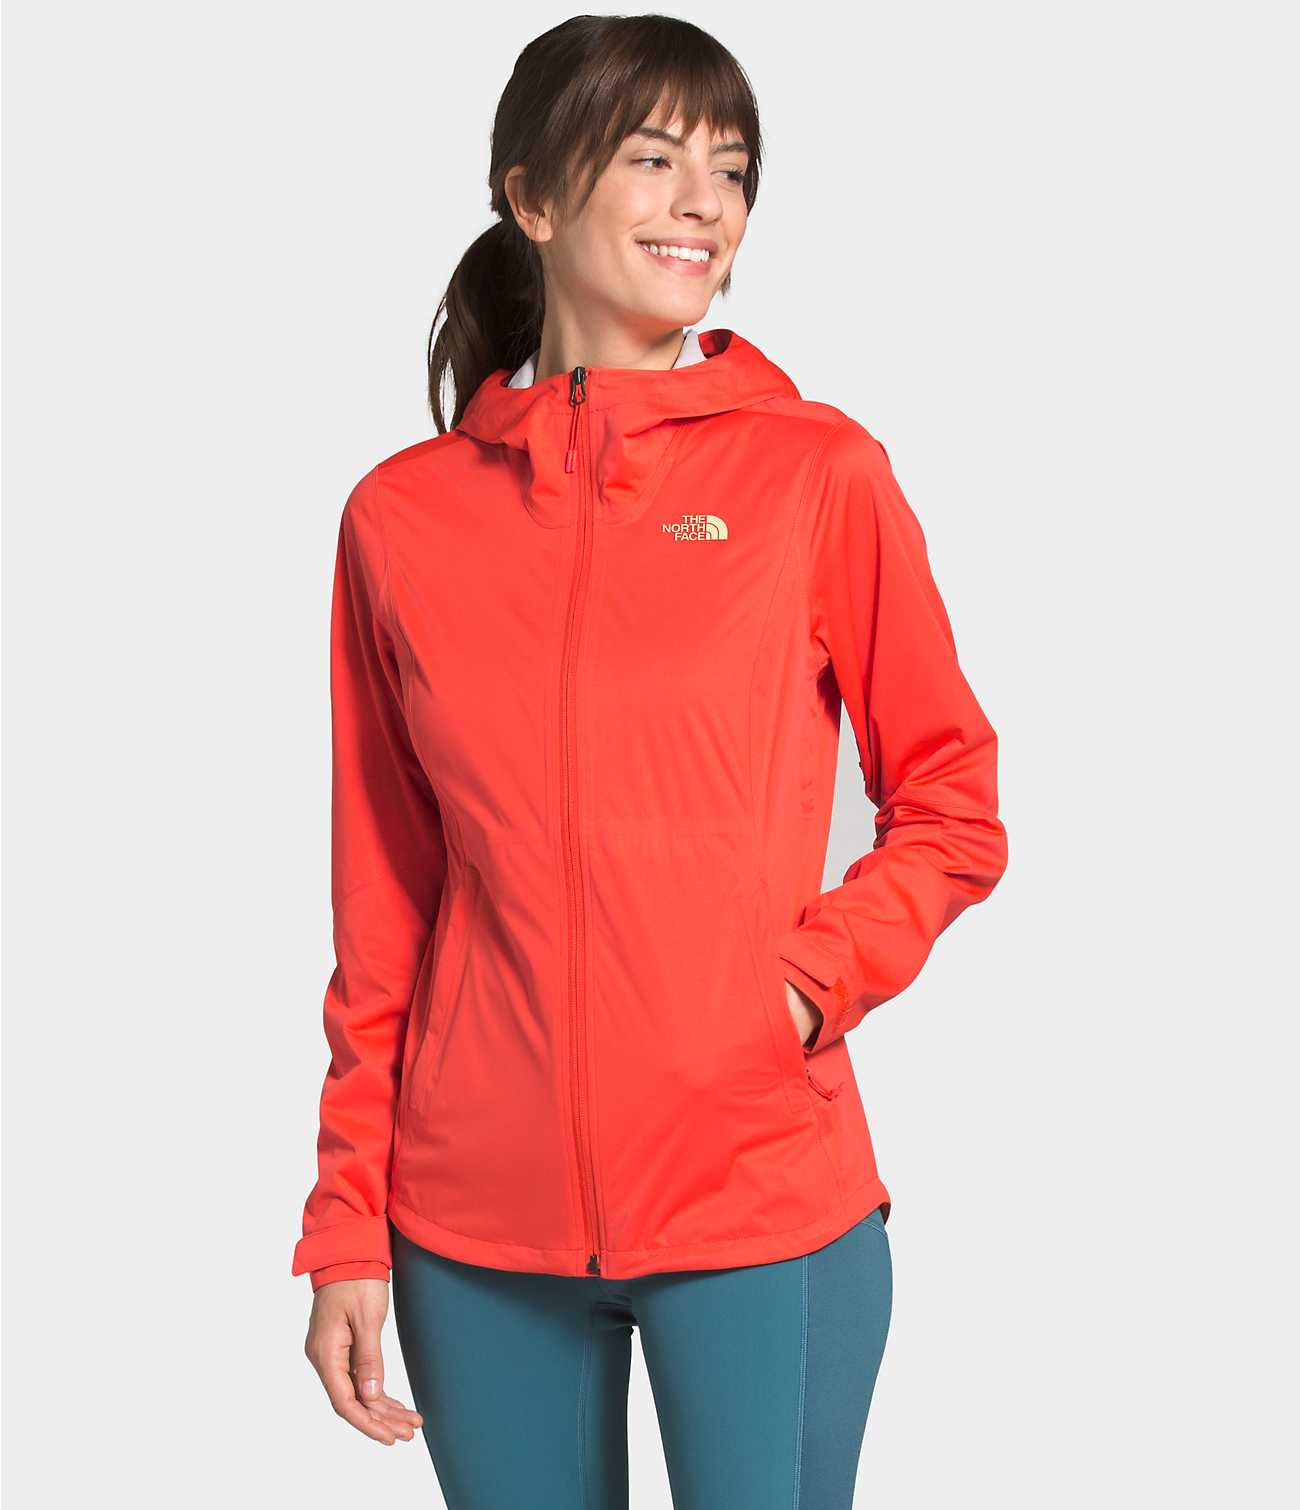 WOMEN'S ALLPROOF STRETCH JACKET